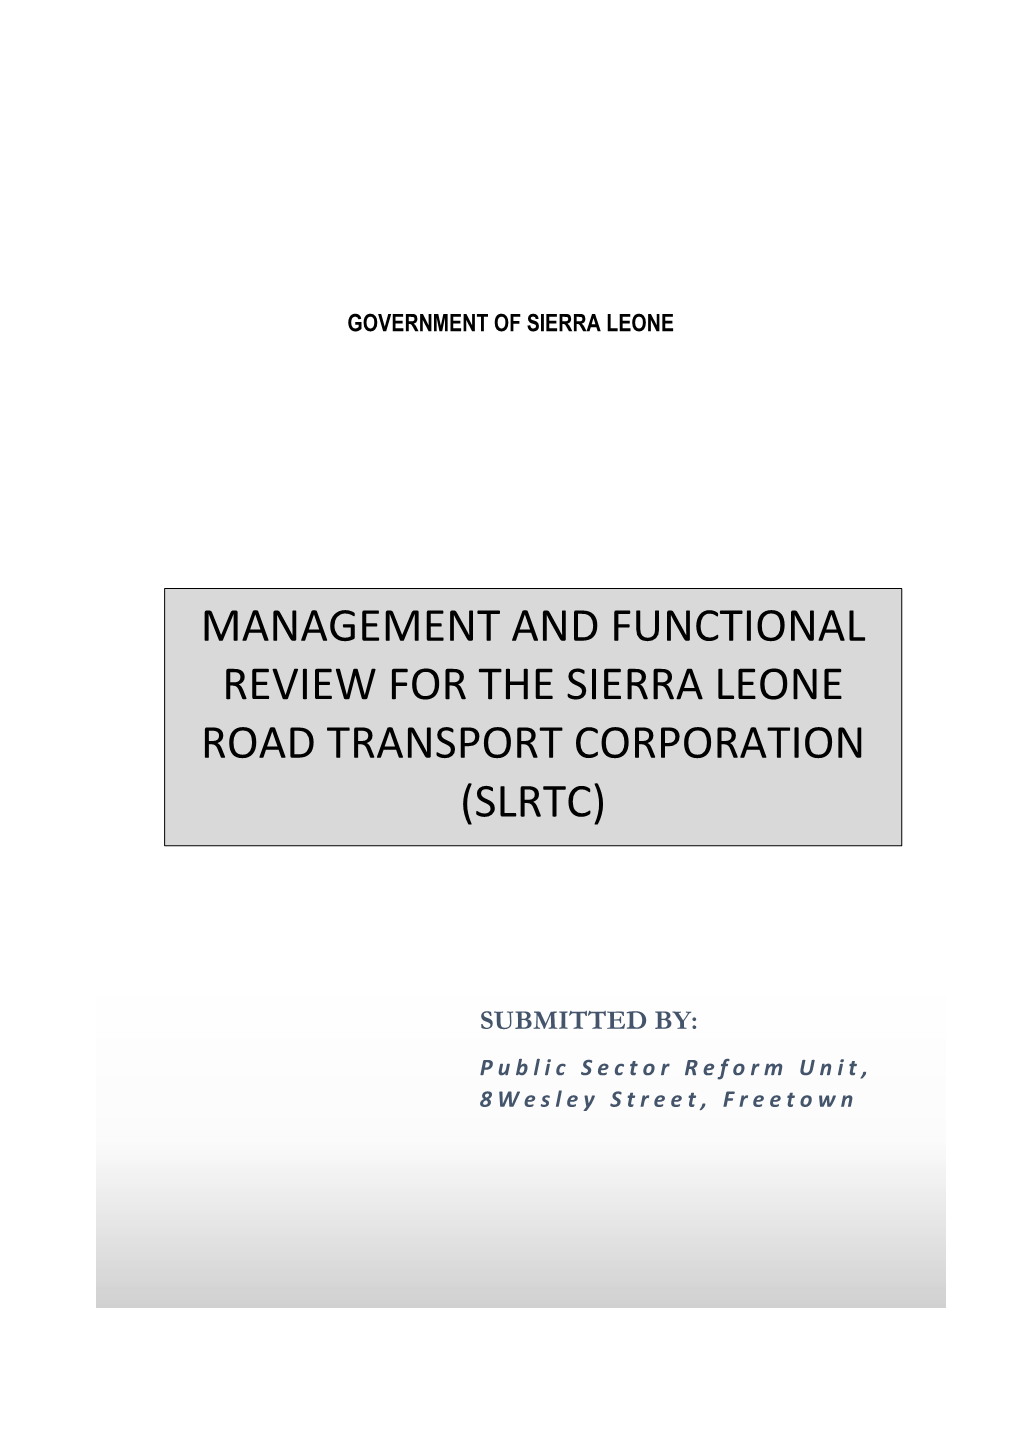 Management and Functional Review for the Sierra Leone Road Transport Corporation (Slrtc)